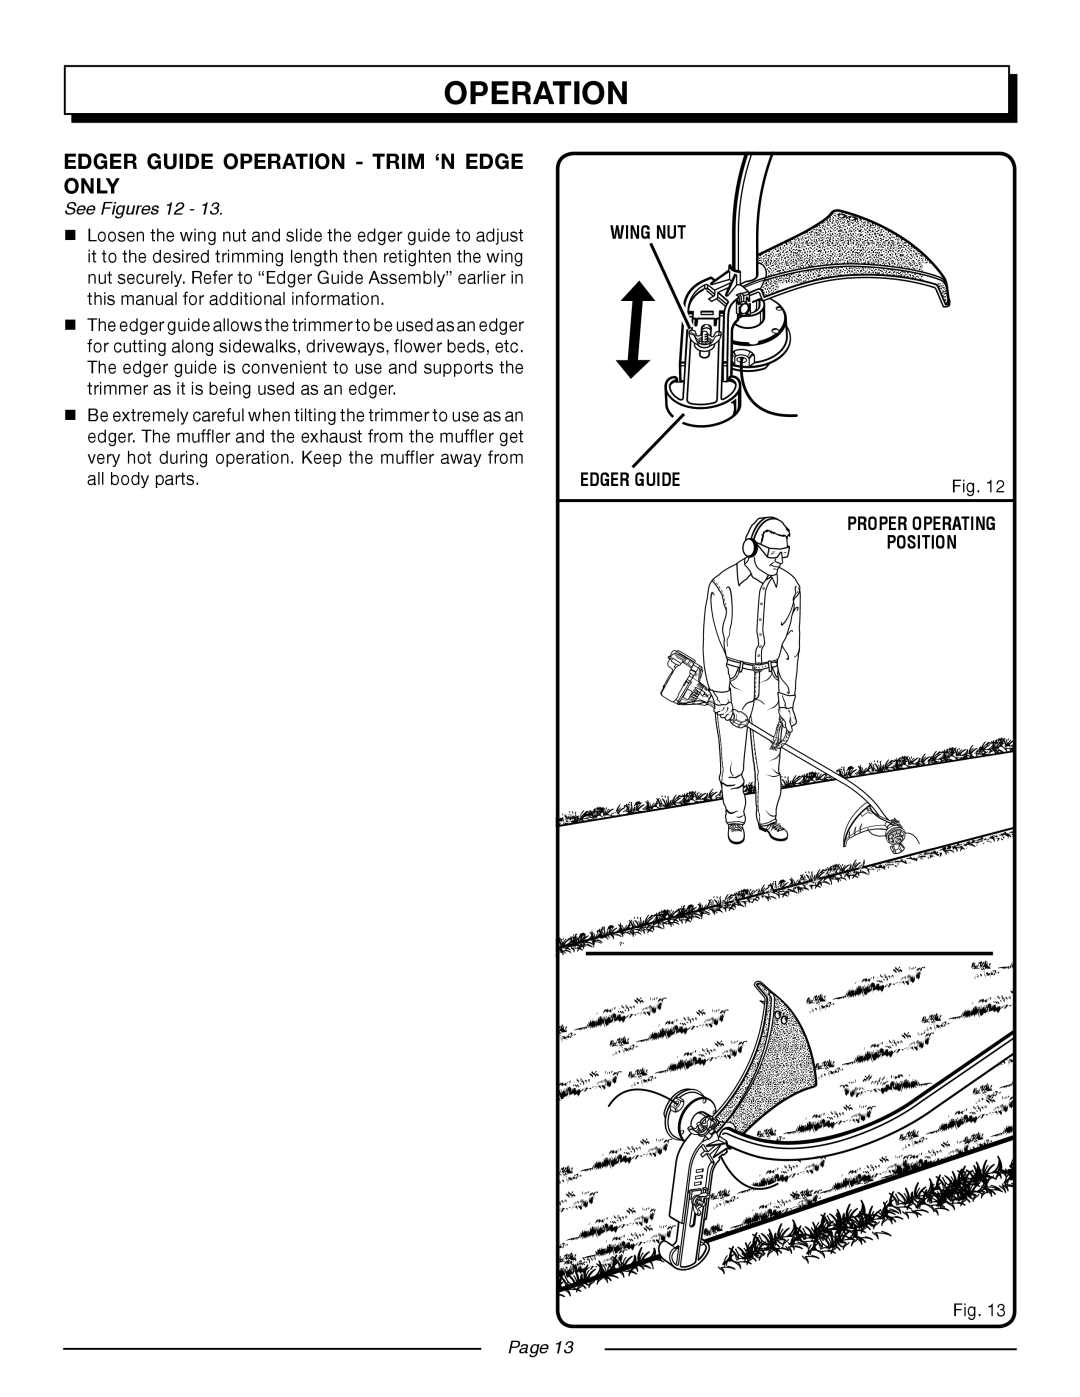 Homelite UT20024B, UT20004B manual Edger Guide Operation - Trim ‘N Edge Only, See Figures, Wing Nut, Page 